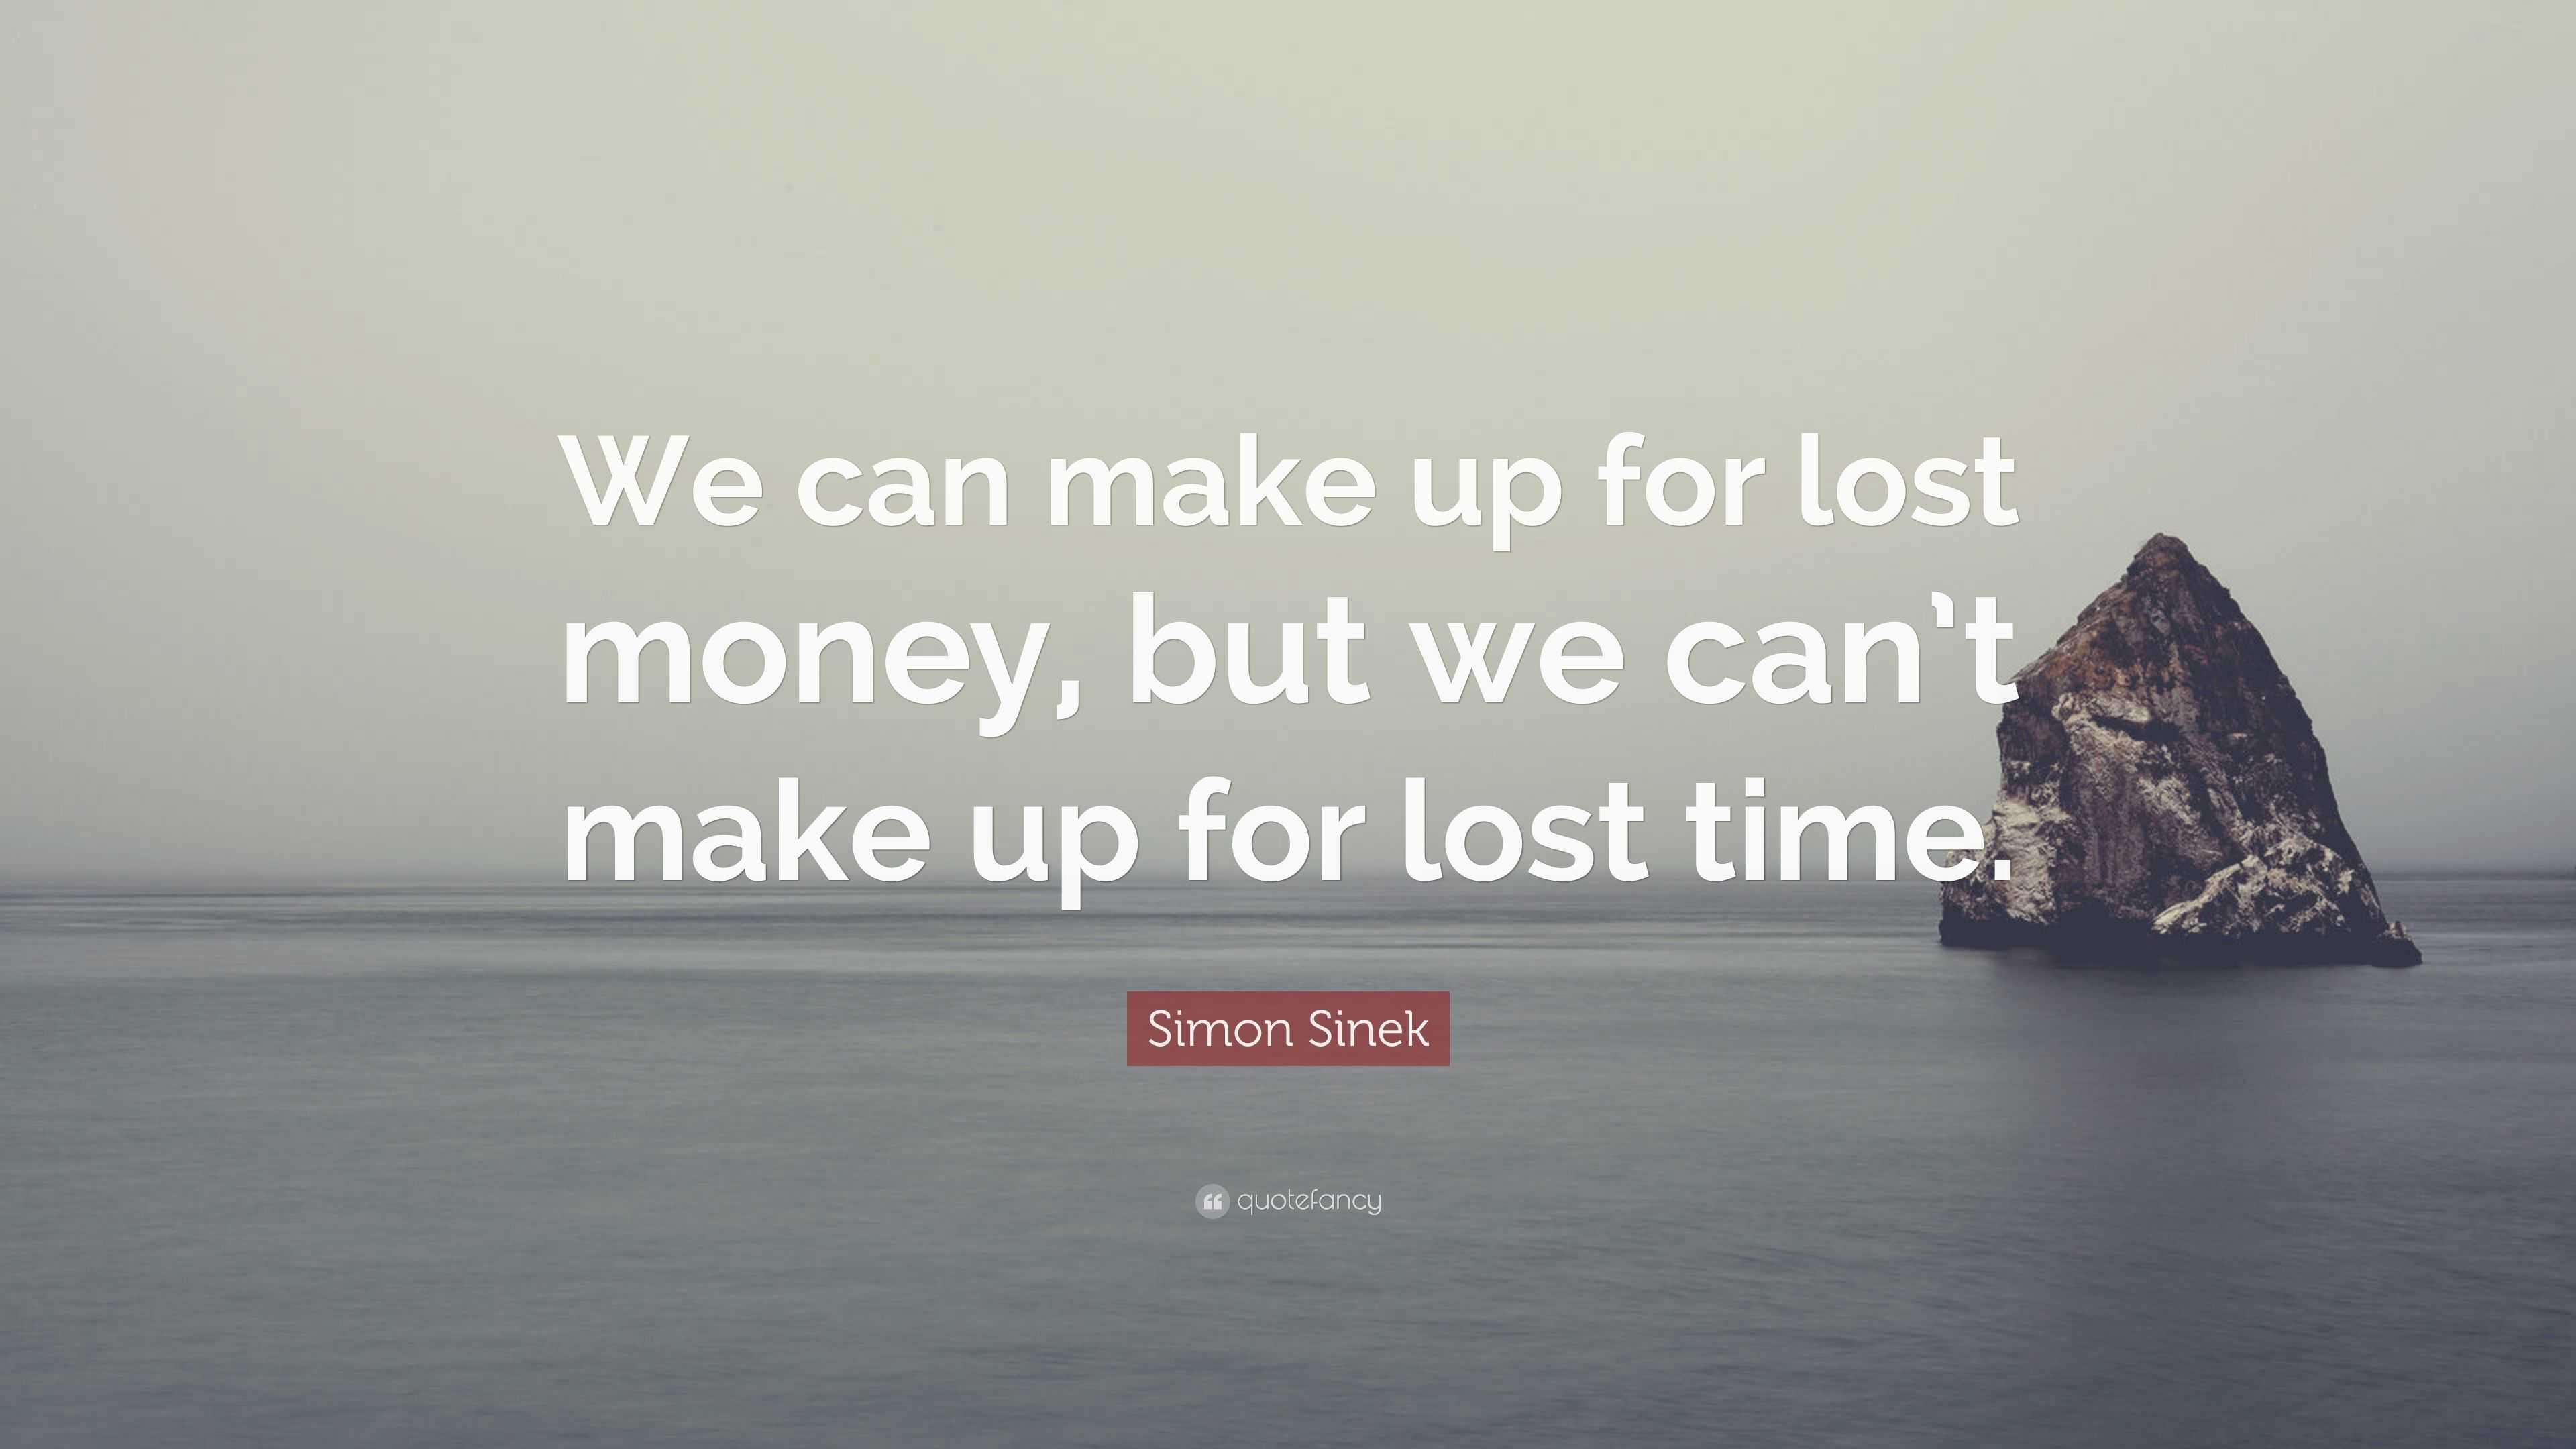 Simon Sinek Quote: “We can make up for lost money, but we can't make up